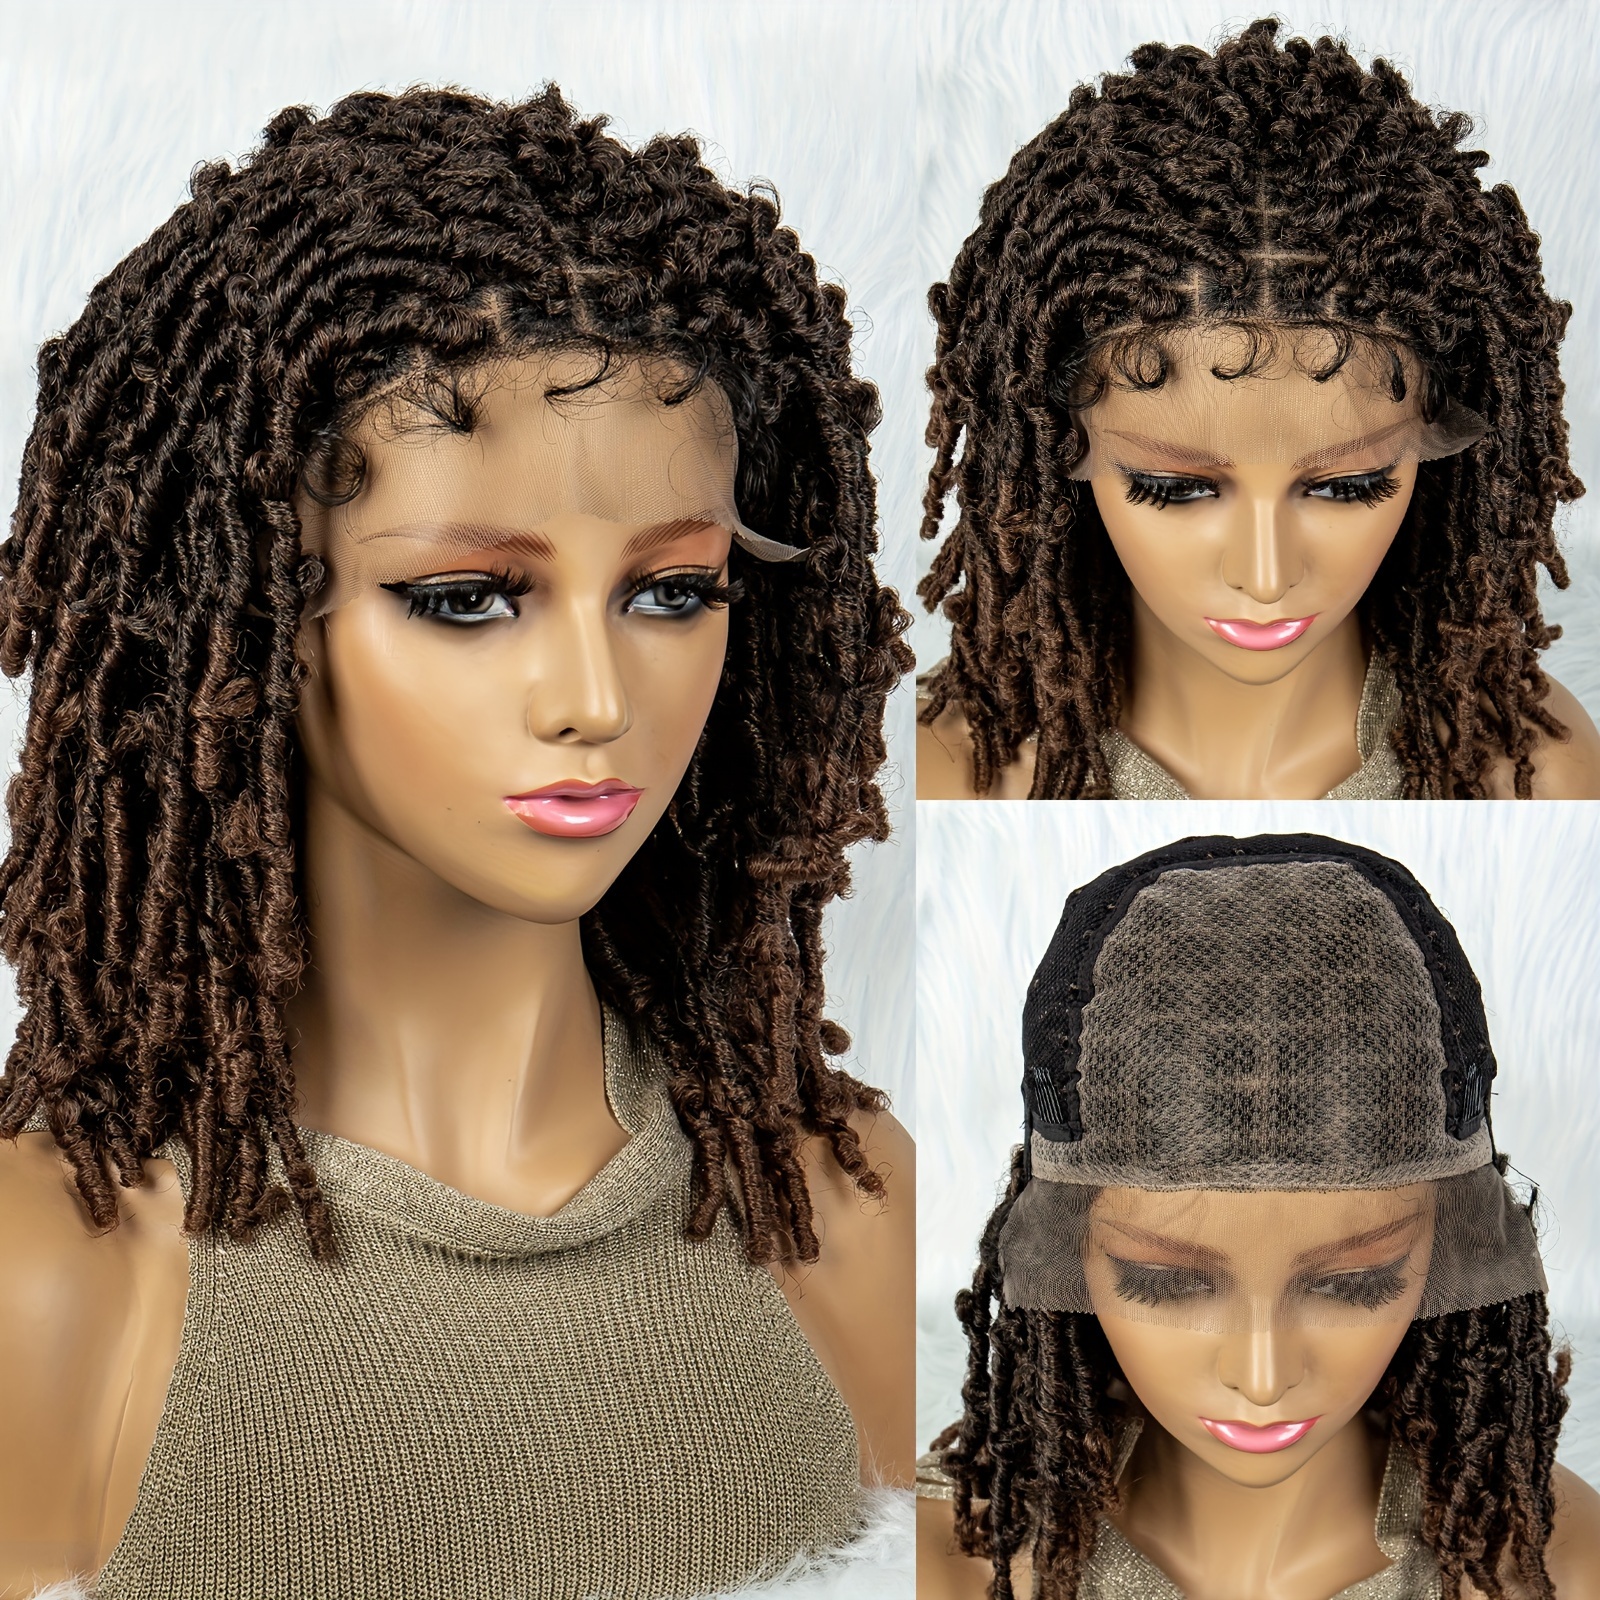 Fulllace Afro Braided Wig ,lace Front Wig Cornrow Wig Faux Locs Wig.front  Lace Braided Wig.wigs for Black Women -  Canada